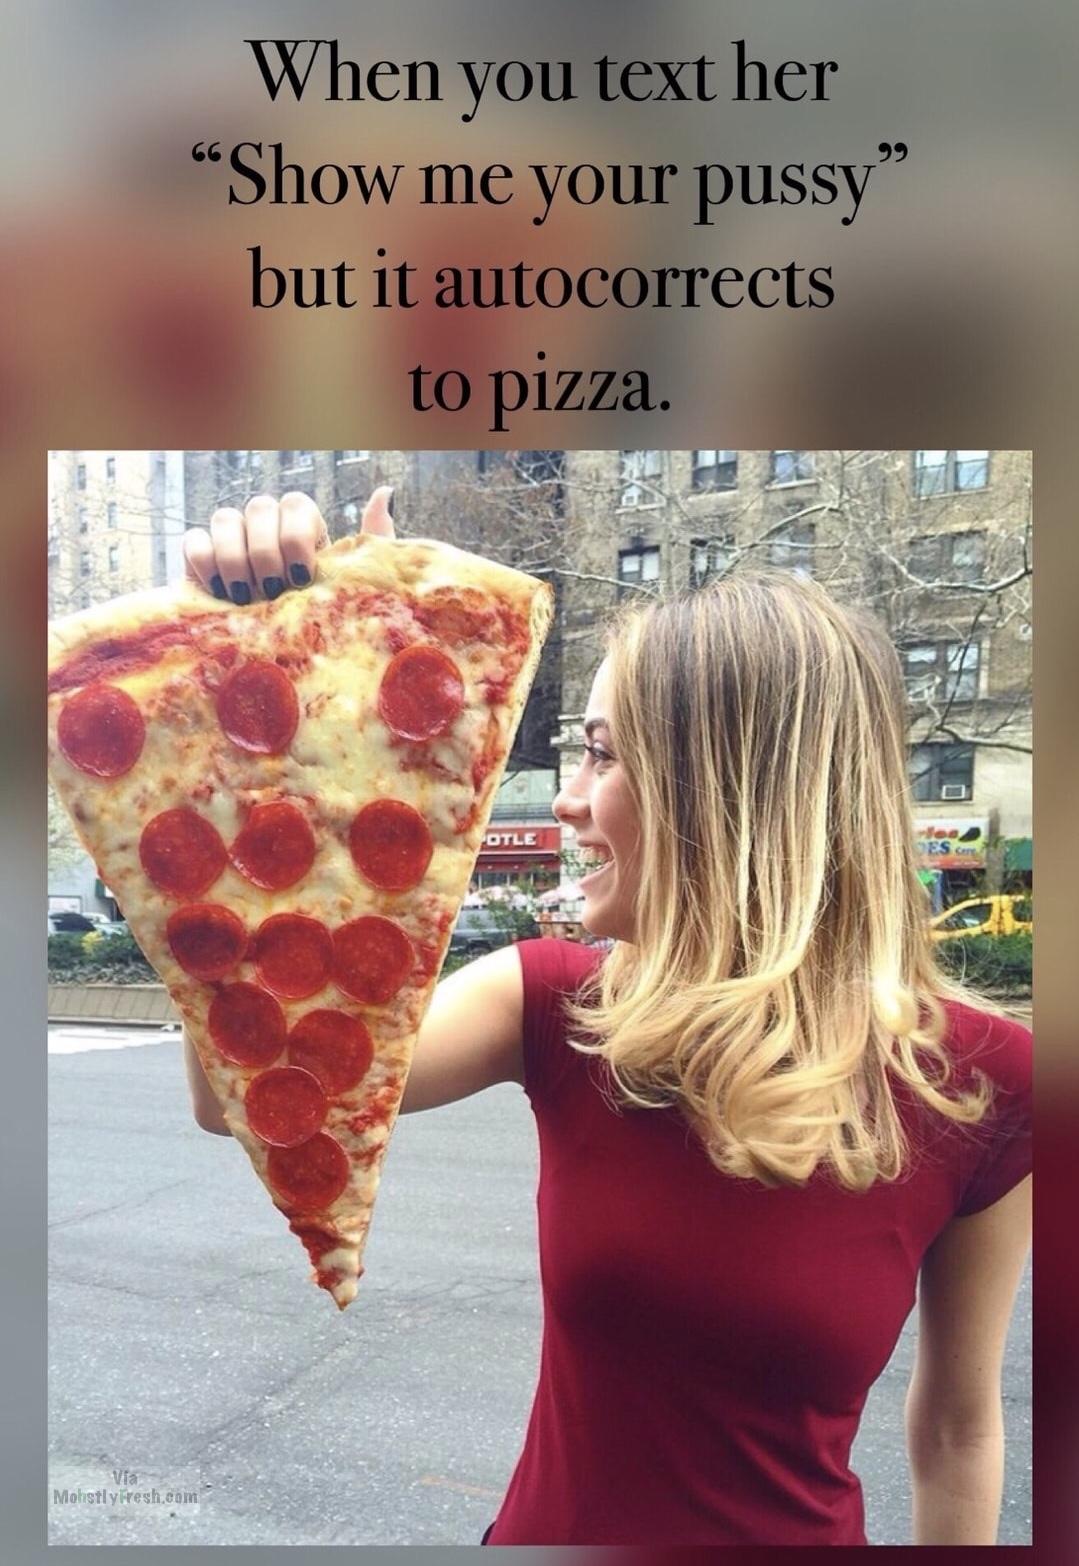 happiness - When you text her "Show me your pussy" but it autocorrects to pizza. Mohstly fresh.com